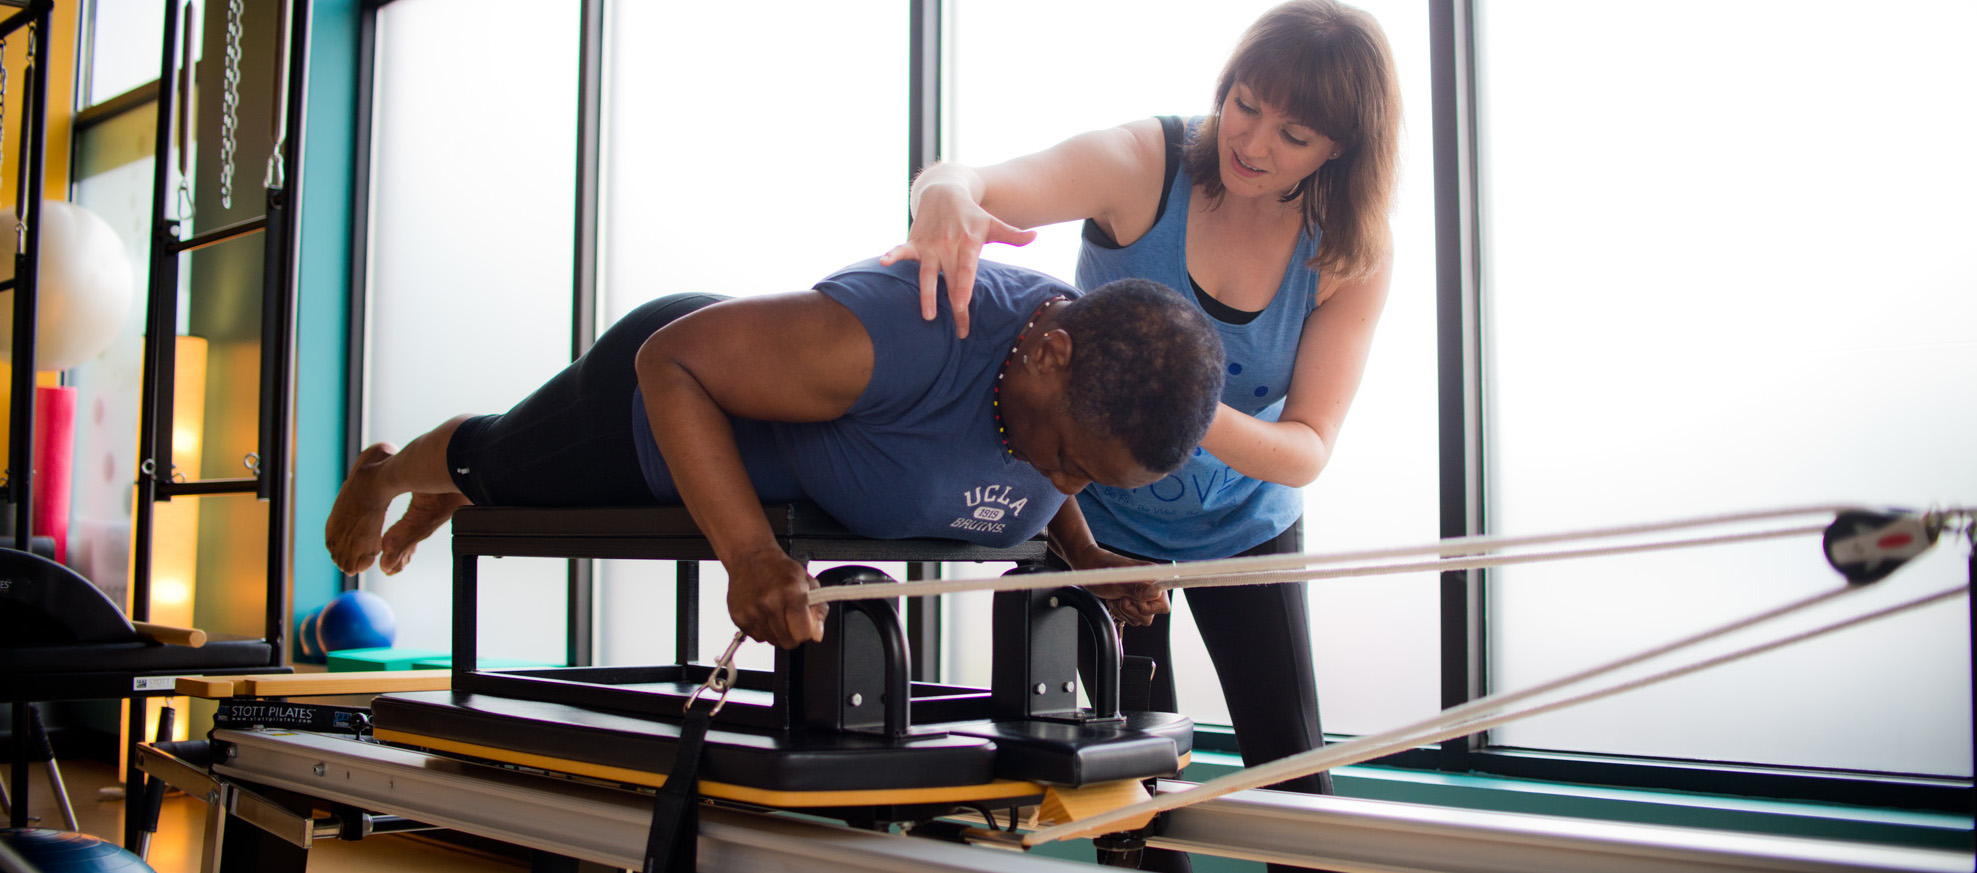 What Makes Pilates Unique Among Movement Systems?